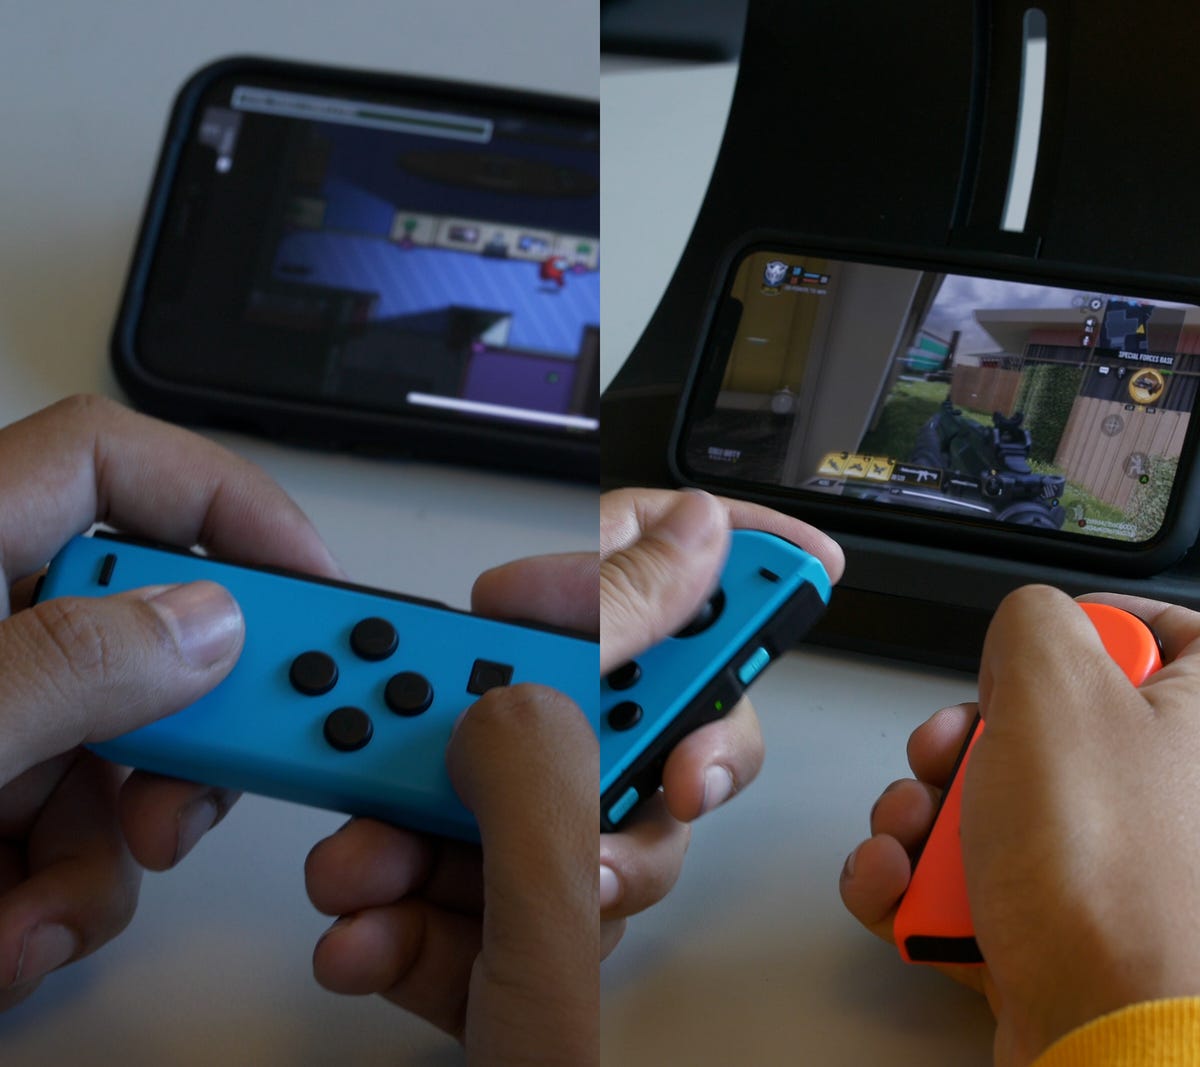 Joy-Con controllers being used to play games on the iPhone